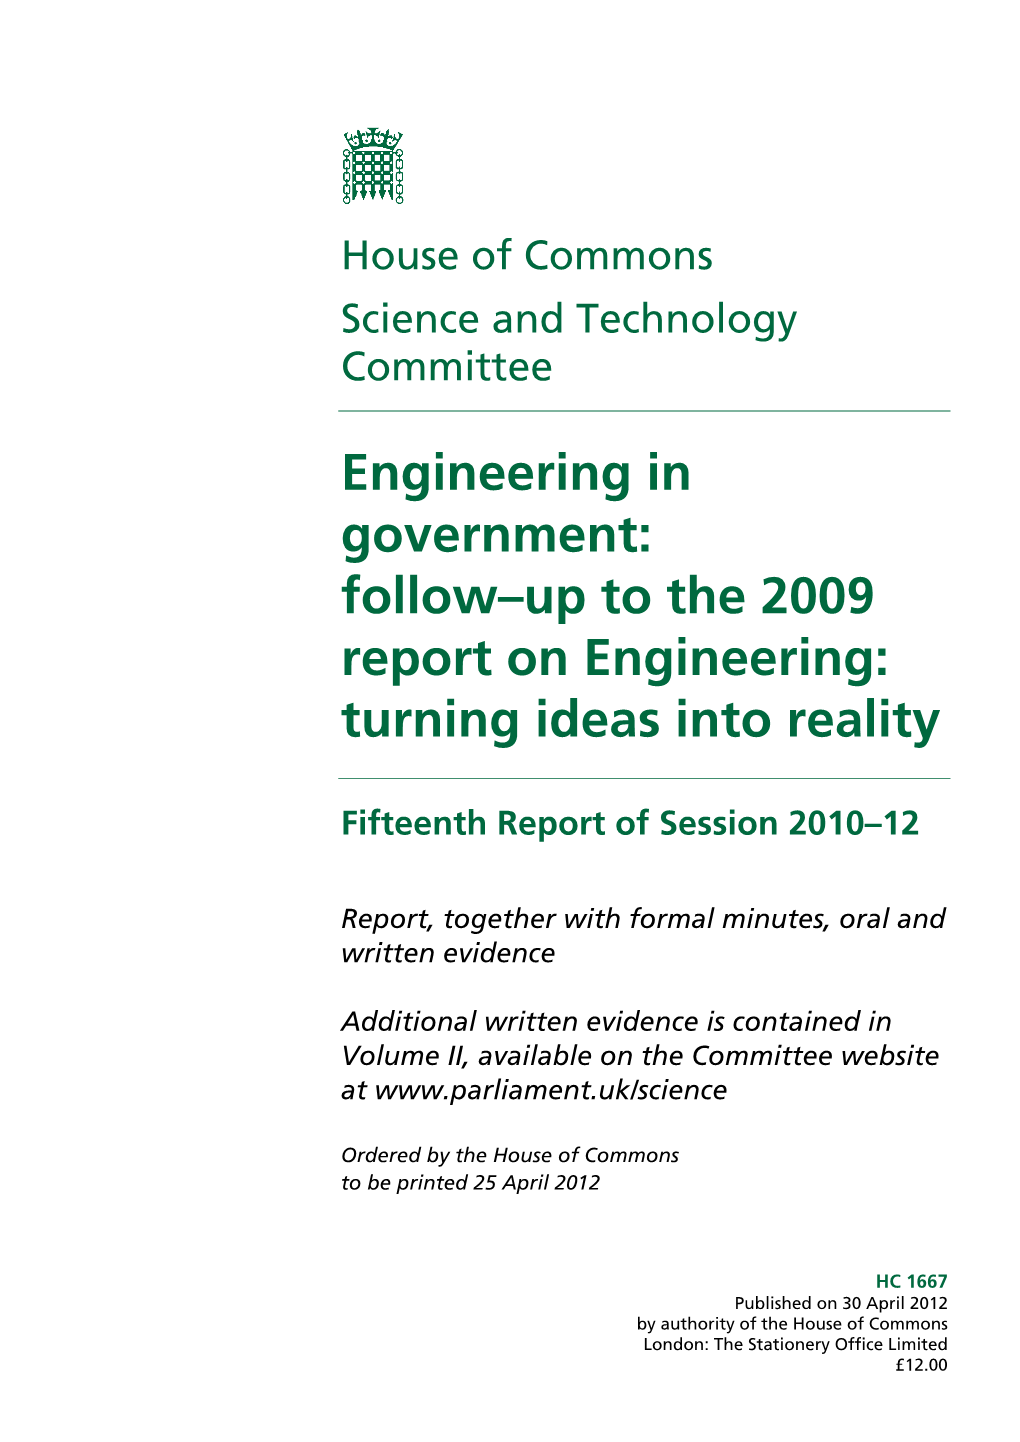 Follow–Up to the 2009 Report on Engineering: Turning Ideas Into Reality